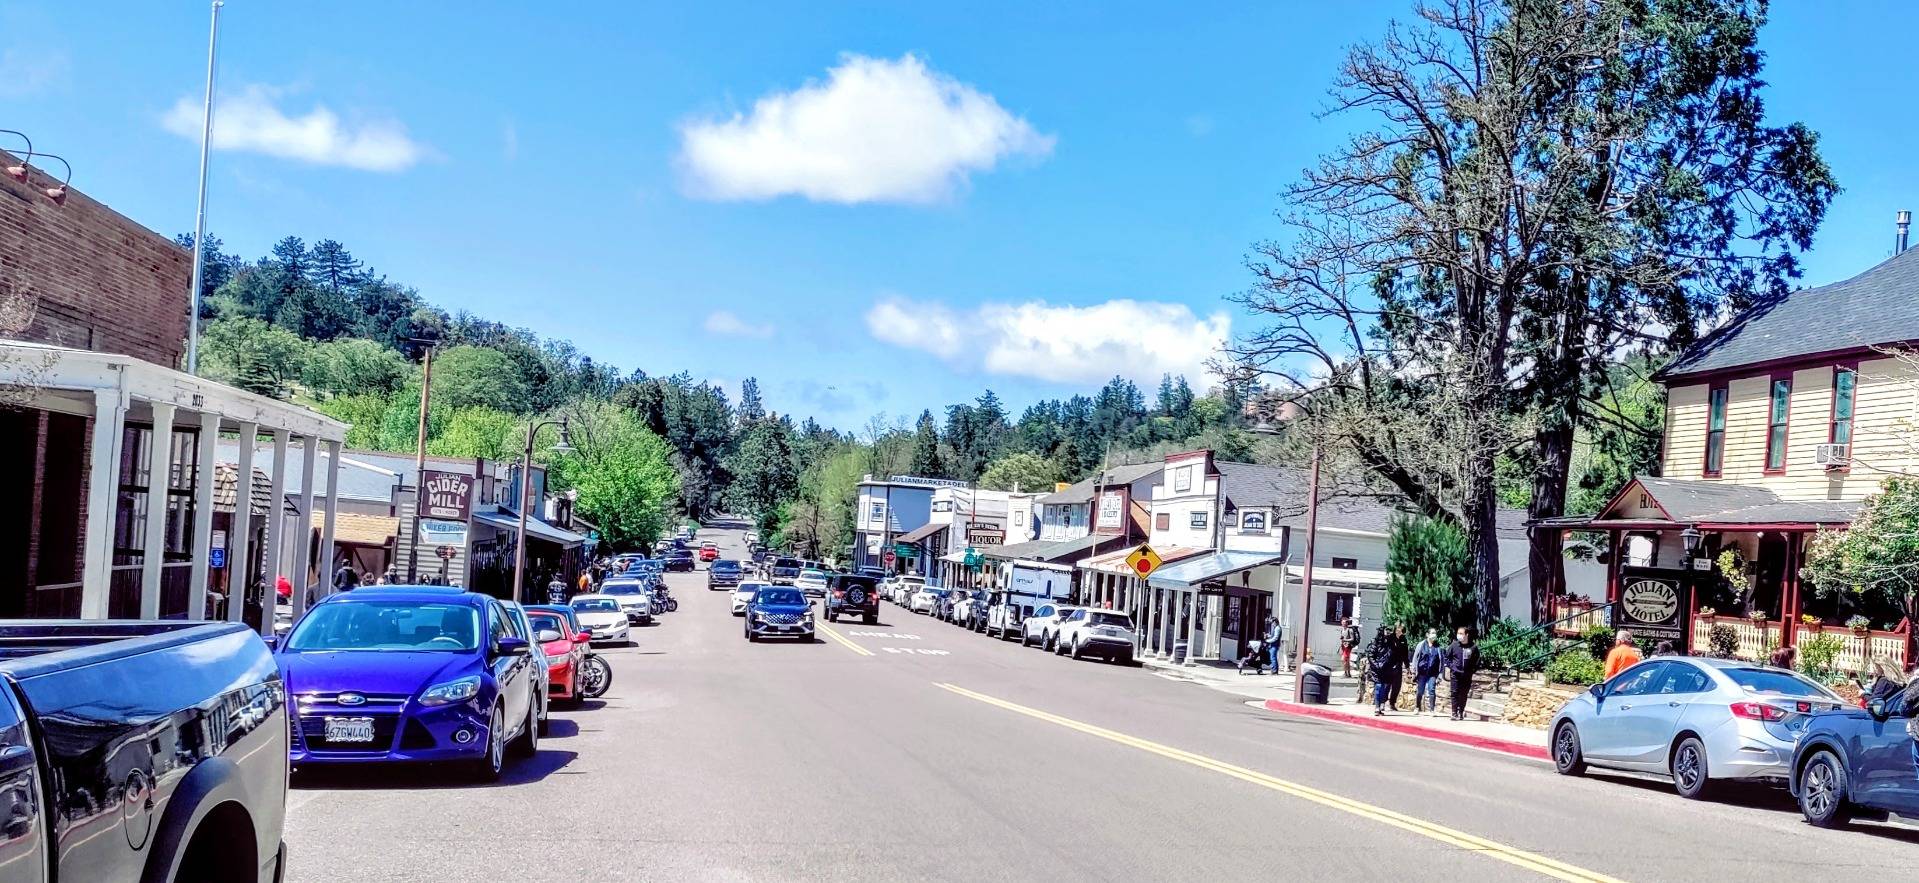 Julian is a lovely, old-timey town known for apple pie and gold mines. It has a unique atmosphere and is set in a beautiful mountain location.